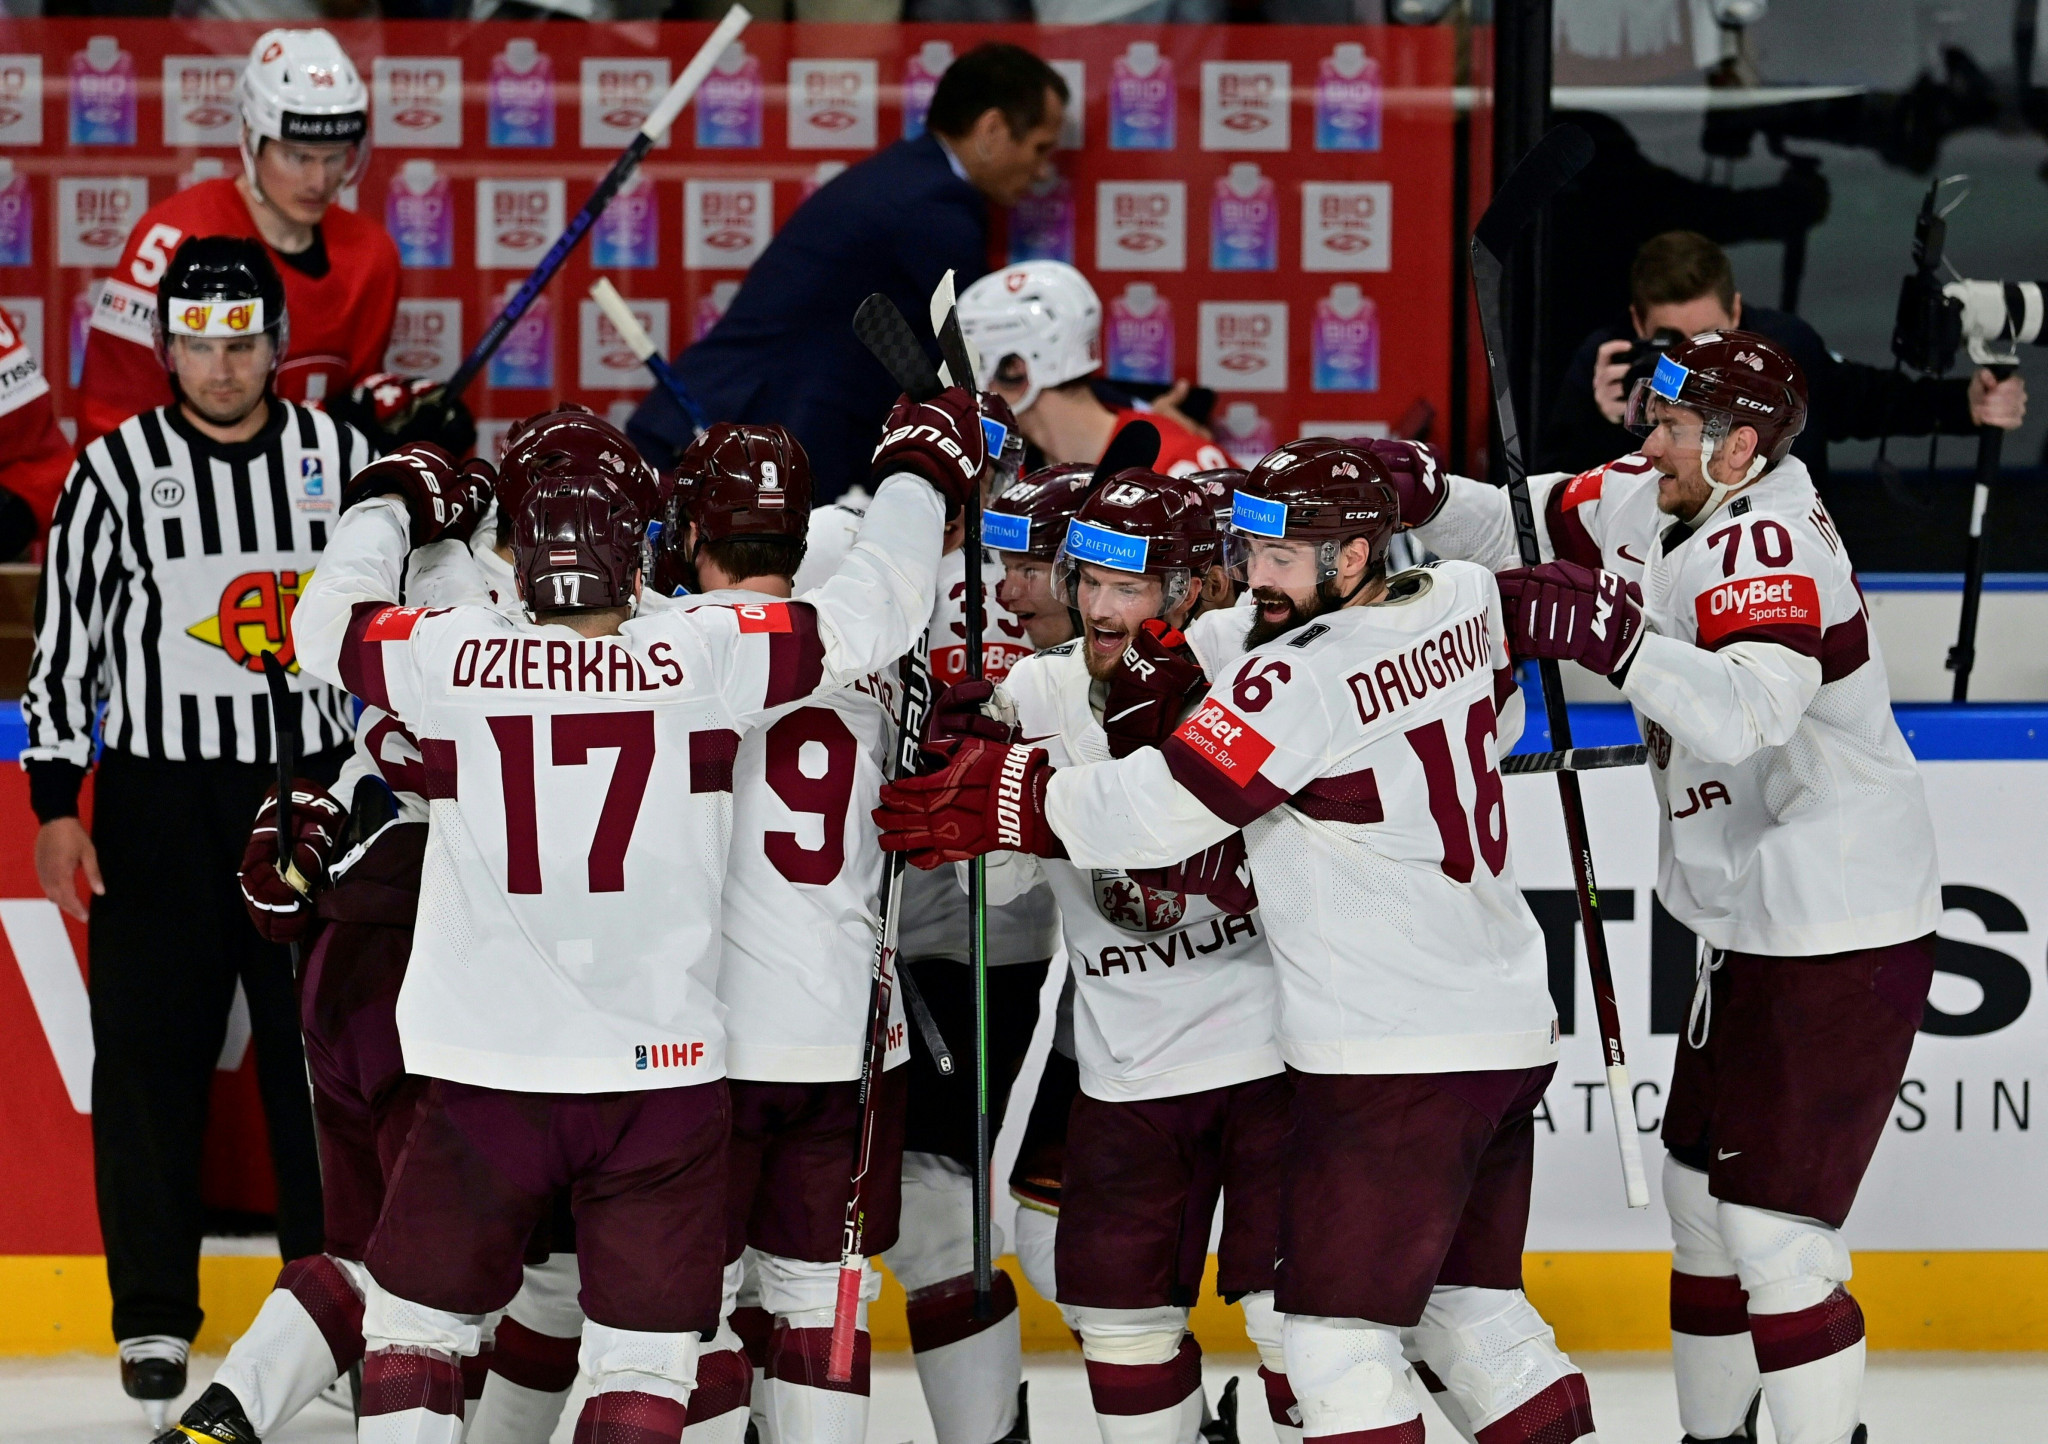 Latvia defeated previously unbeaten Switzerland to reach the last eight of the Ice Hockey World Championship before their home fans in Riga ©Getty Images